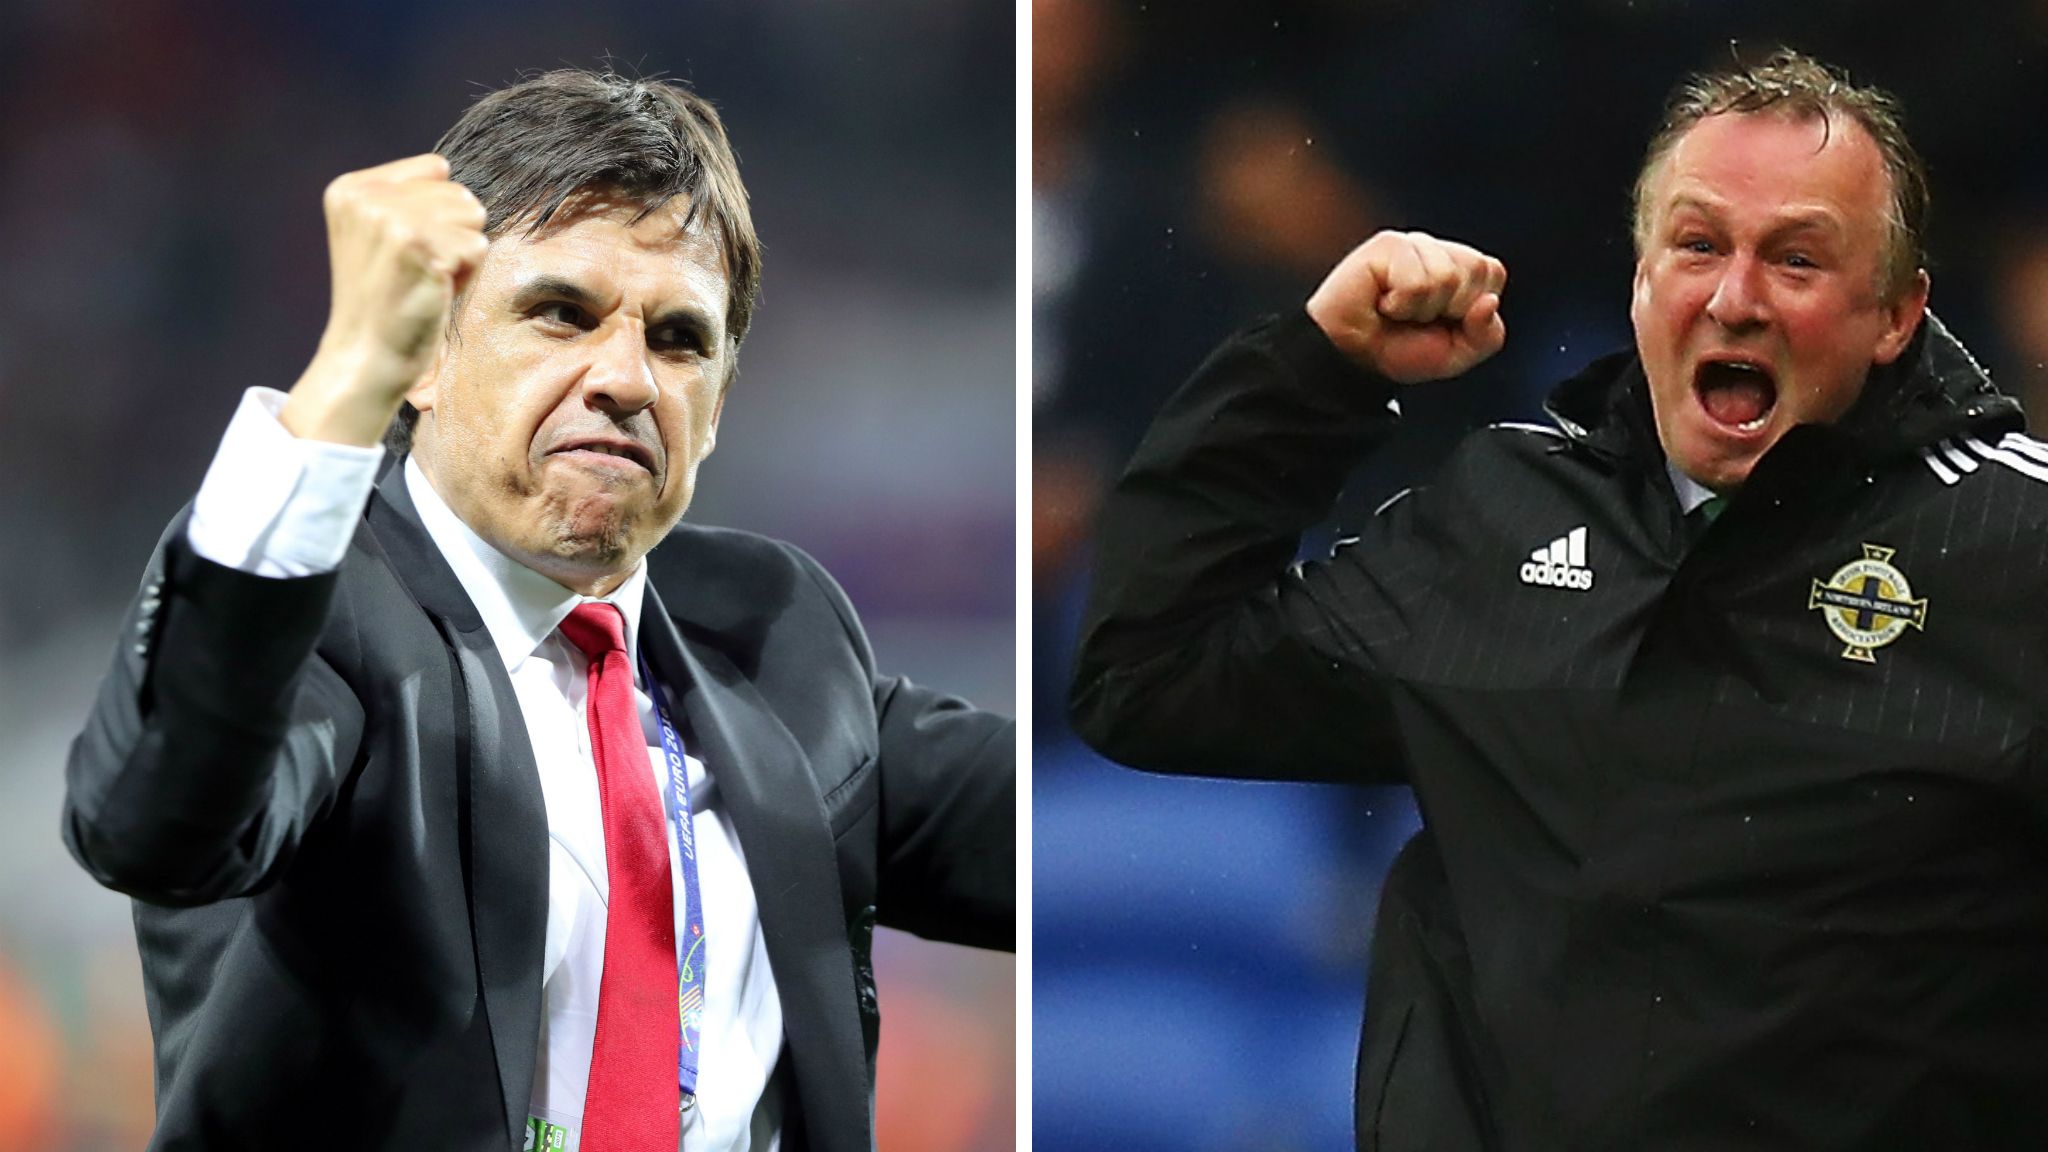 Wales manager Chris Coleman and Northern Ireland boss Michael O'Neill